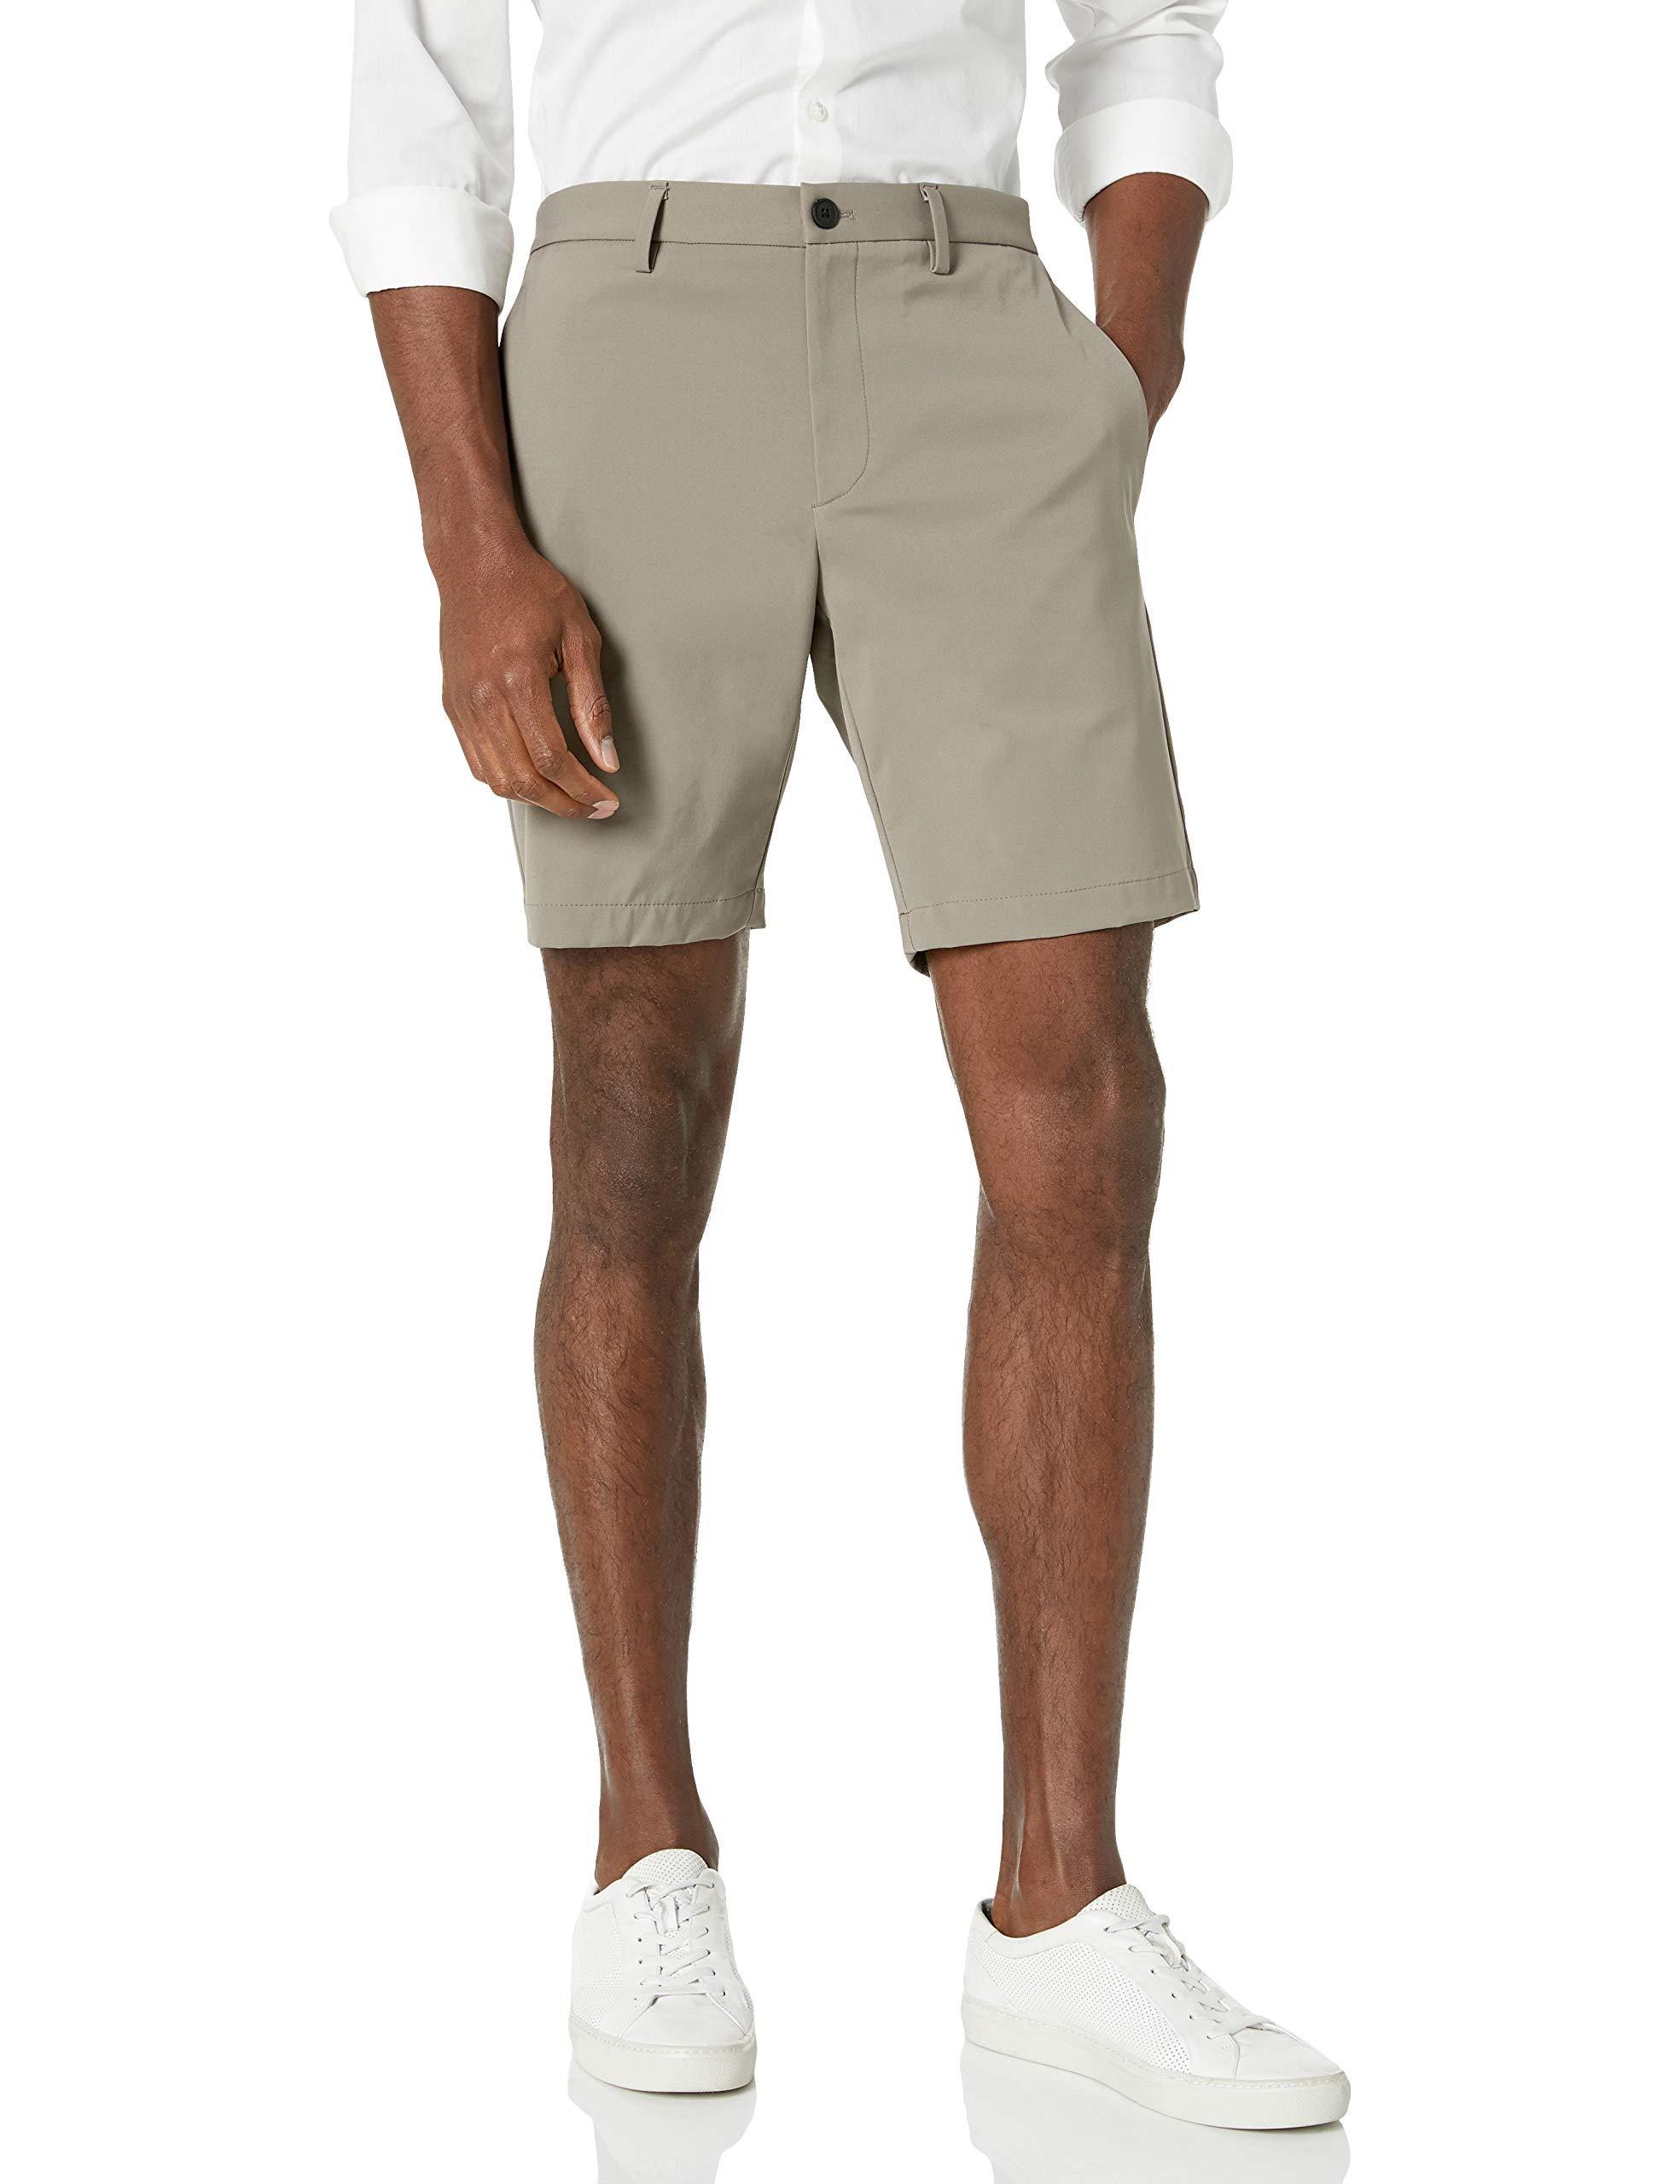 Theory Zaine Cotton Stretch Shorts in Natural for Men - Lyst